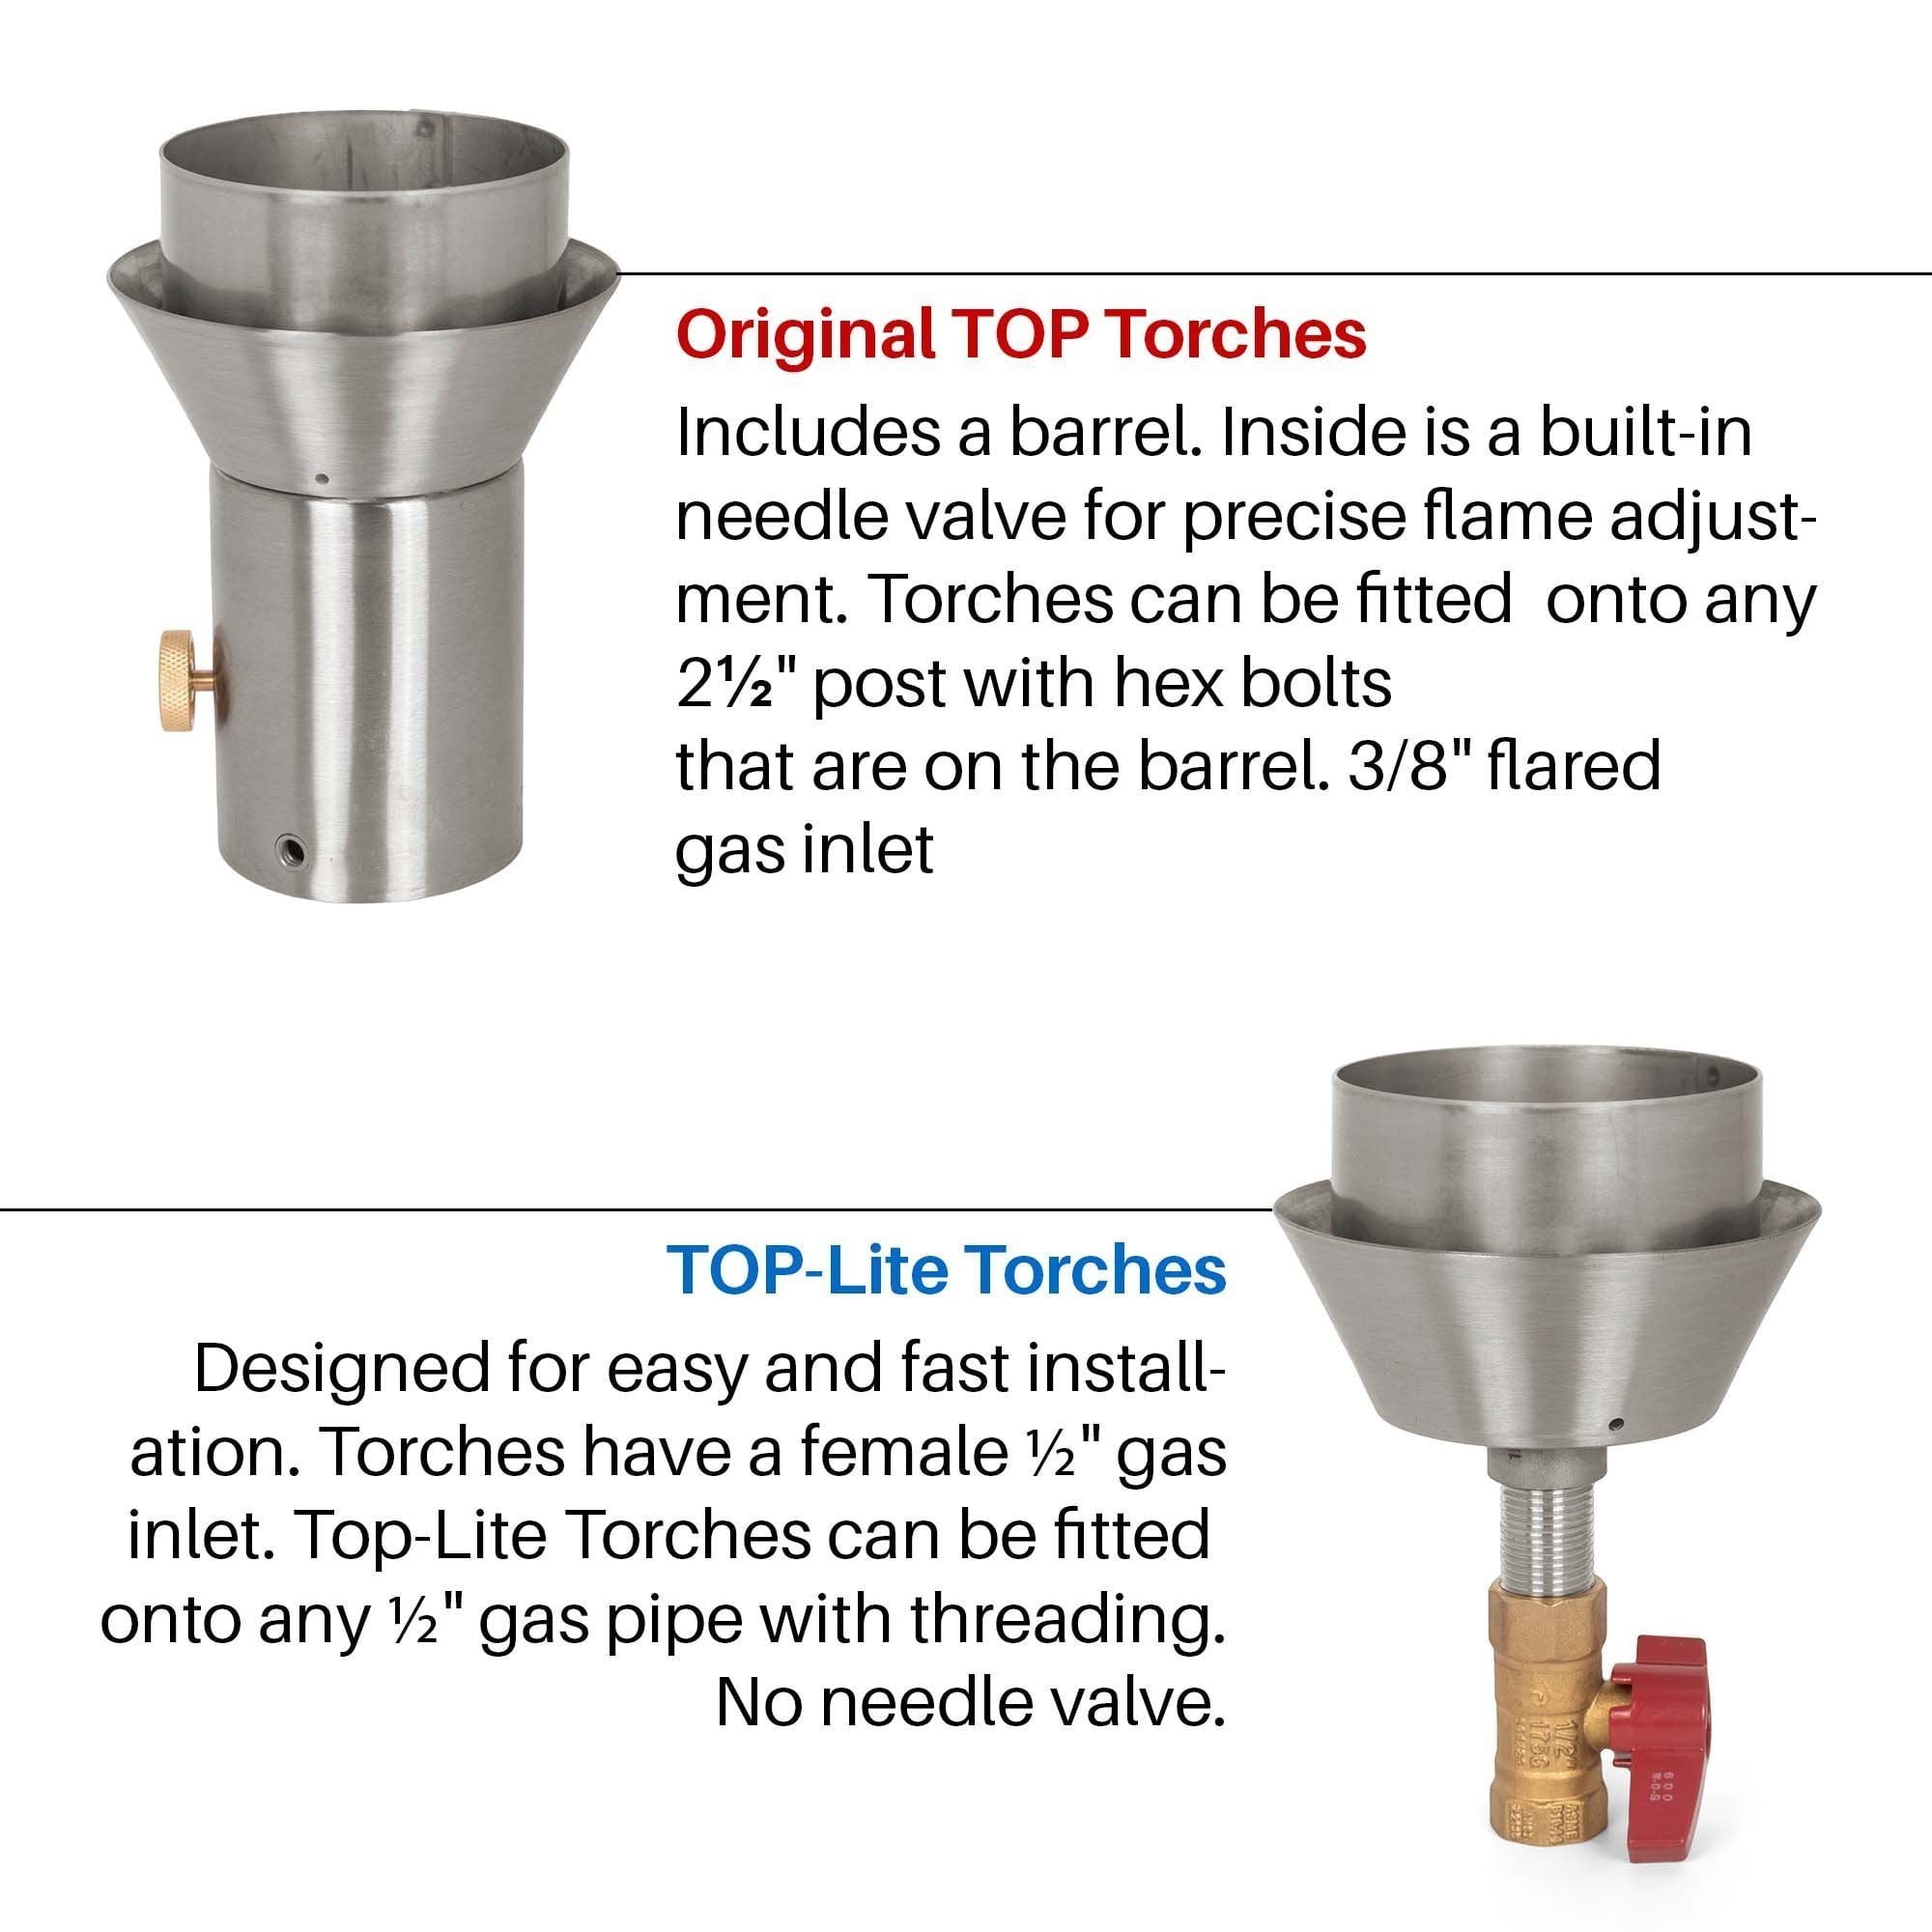 TOP FIRES HERCULES Fire Torch 14" in Stainless Steel - Majestic Fountains